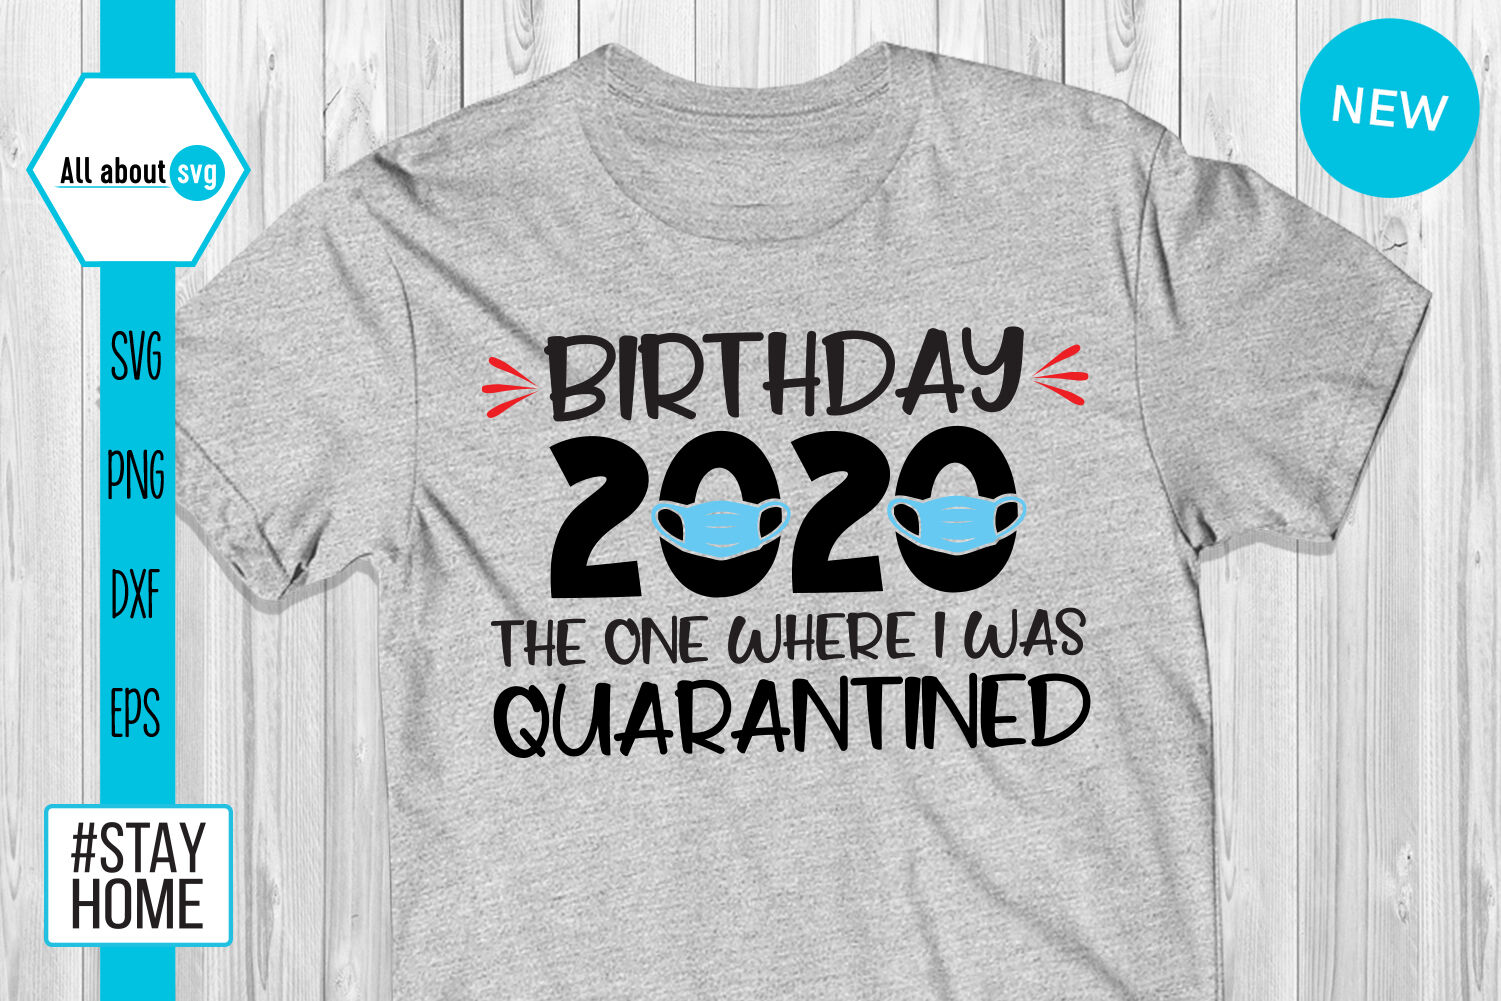 Download Birthday 2020 Quarantined Svg By All About Svg ...